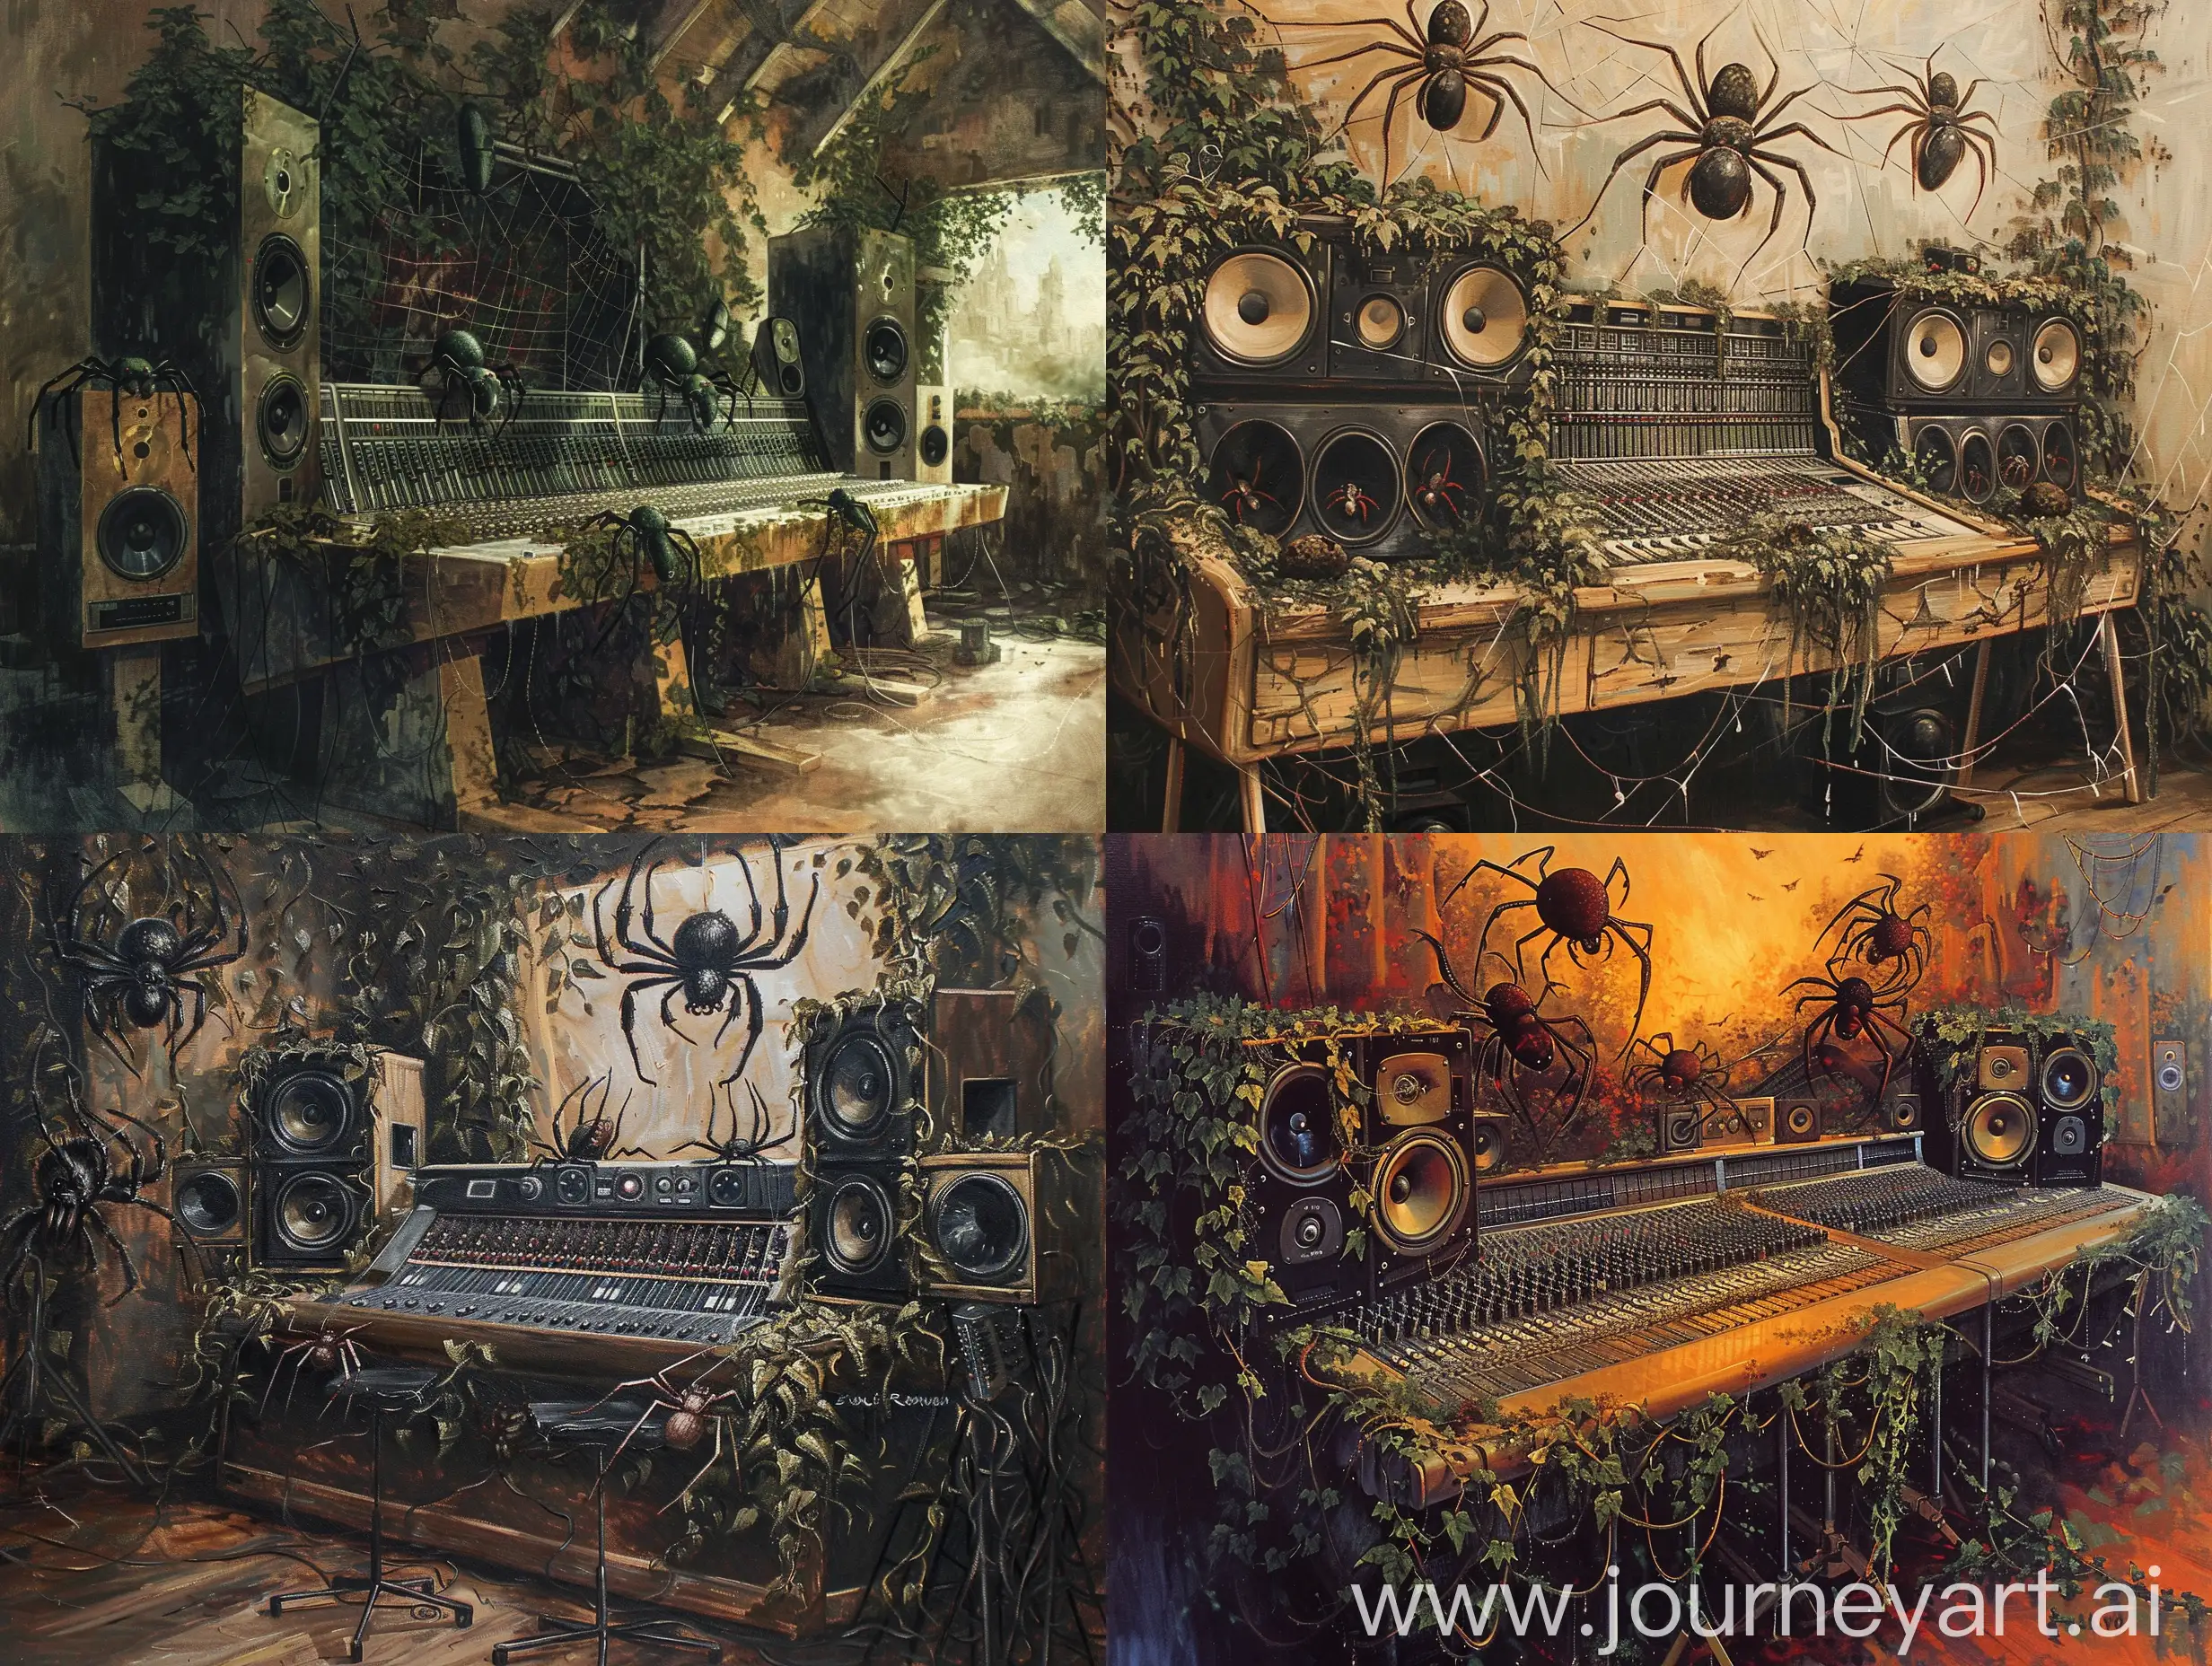 Rembrandt-Style-Painting-Recording-Studio-with-IvyCovered-Mixing-Desk-and-Spiders-on-Loudspeakers